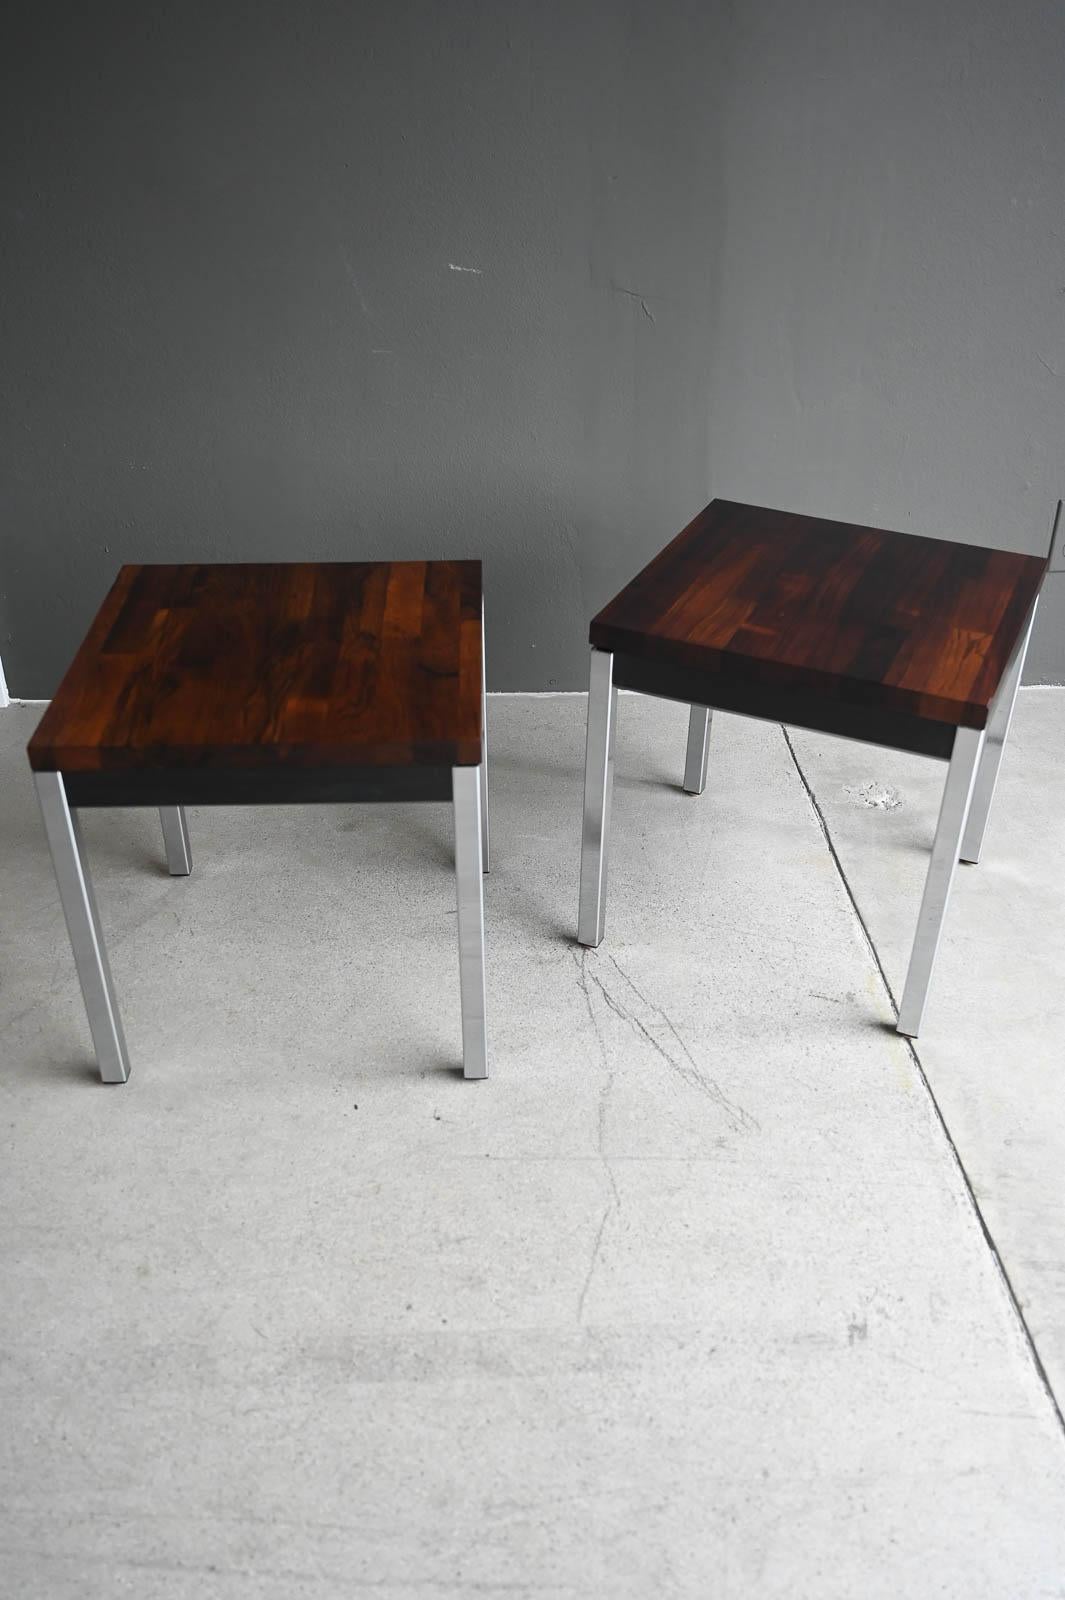 Rosewood Parquet Side Tables by David Parmelee for Founders, ca. 1970.  Beautiful rosewood parquet tops with shiny chrome bases and black trimmed edging.  Good original condition with only slight wear as shown to one edge and slight separation on